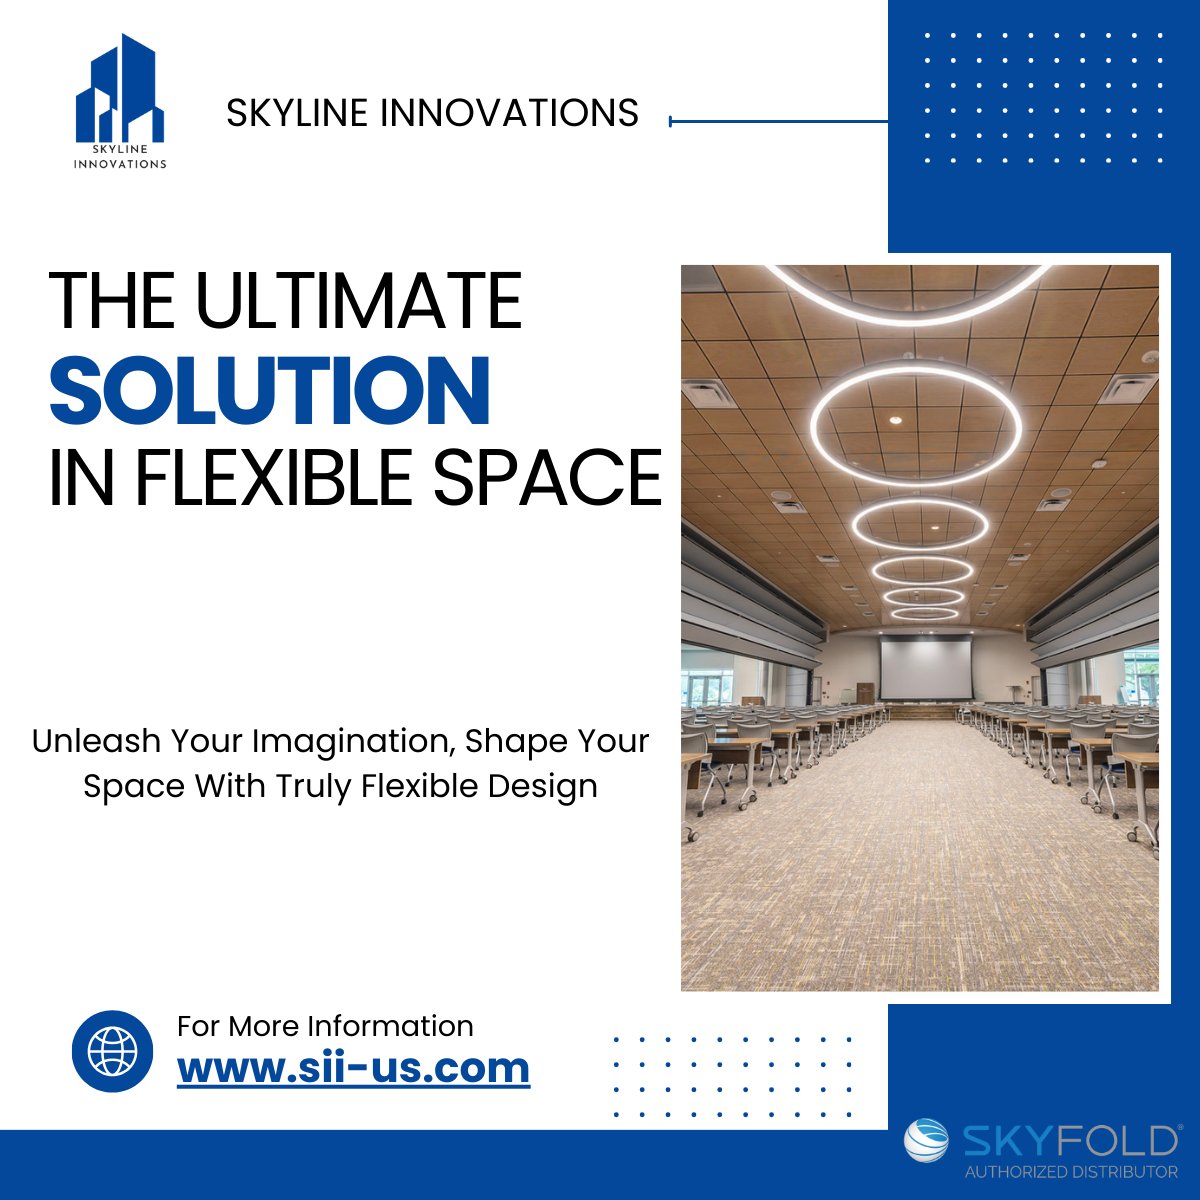 Set your creativity free and craft your space with Skyfold and the possibilities it creates!   #CreativeSpaces #innovation #ThinkVertical #design #architecture